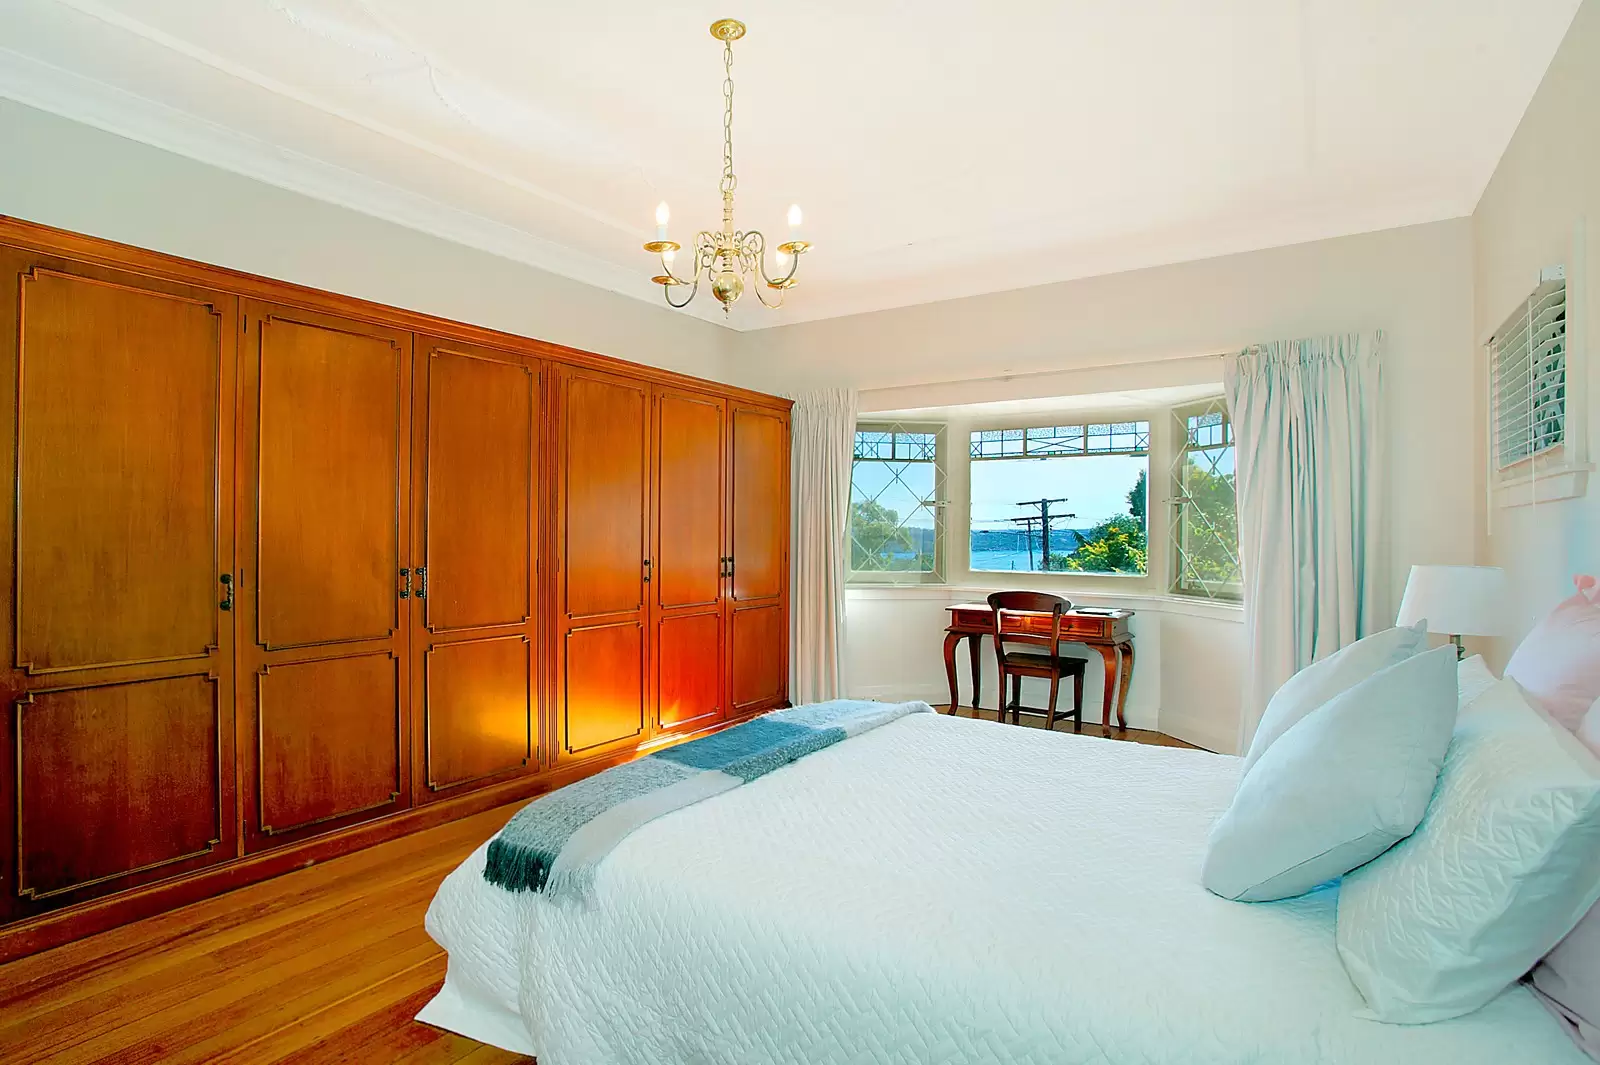 Photo #8: 15 Olphert Avenue, Vaucluse - Sold by Sydney Sotheby's International Realty